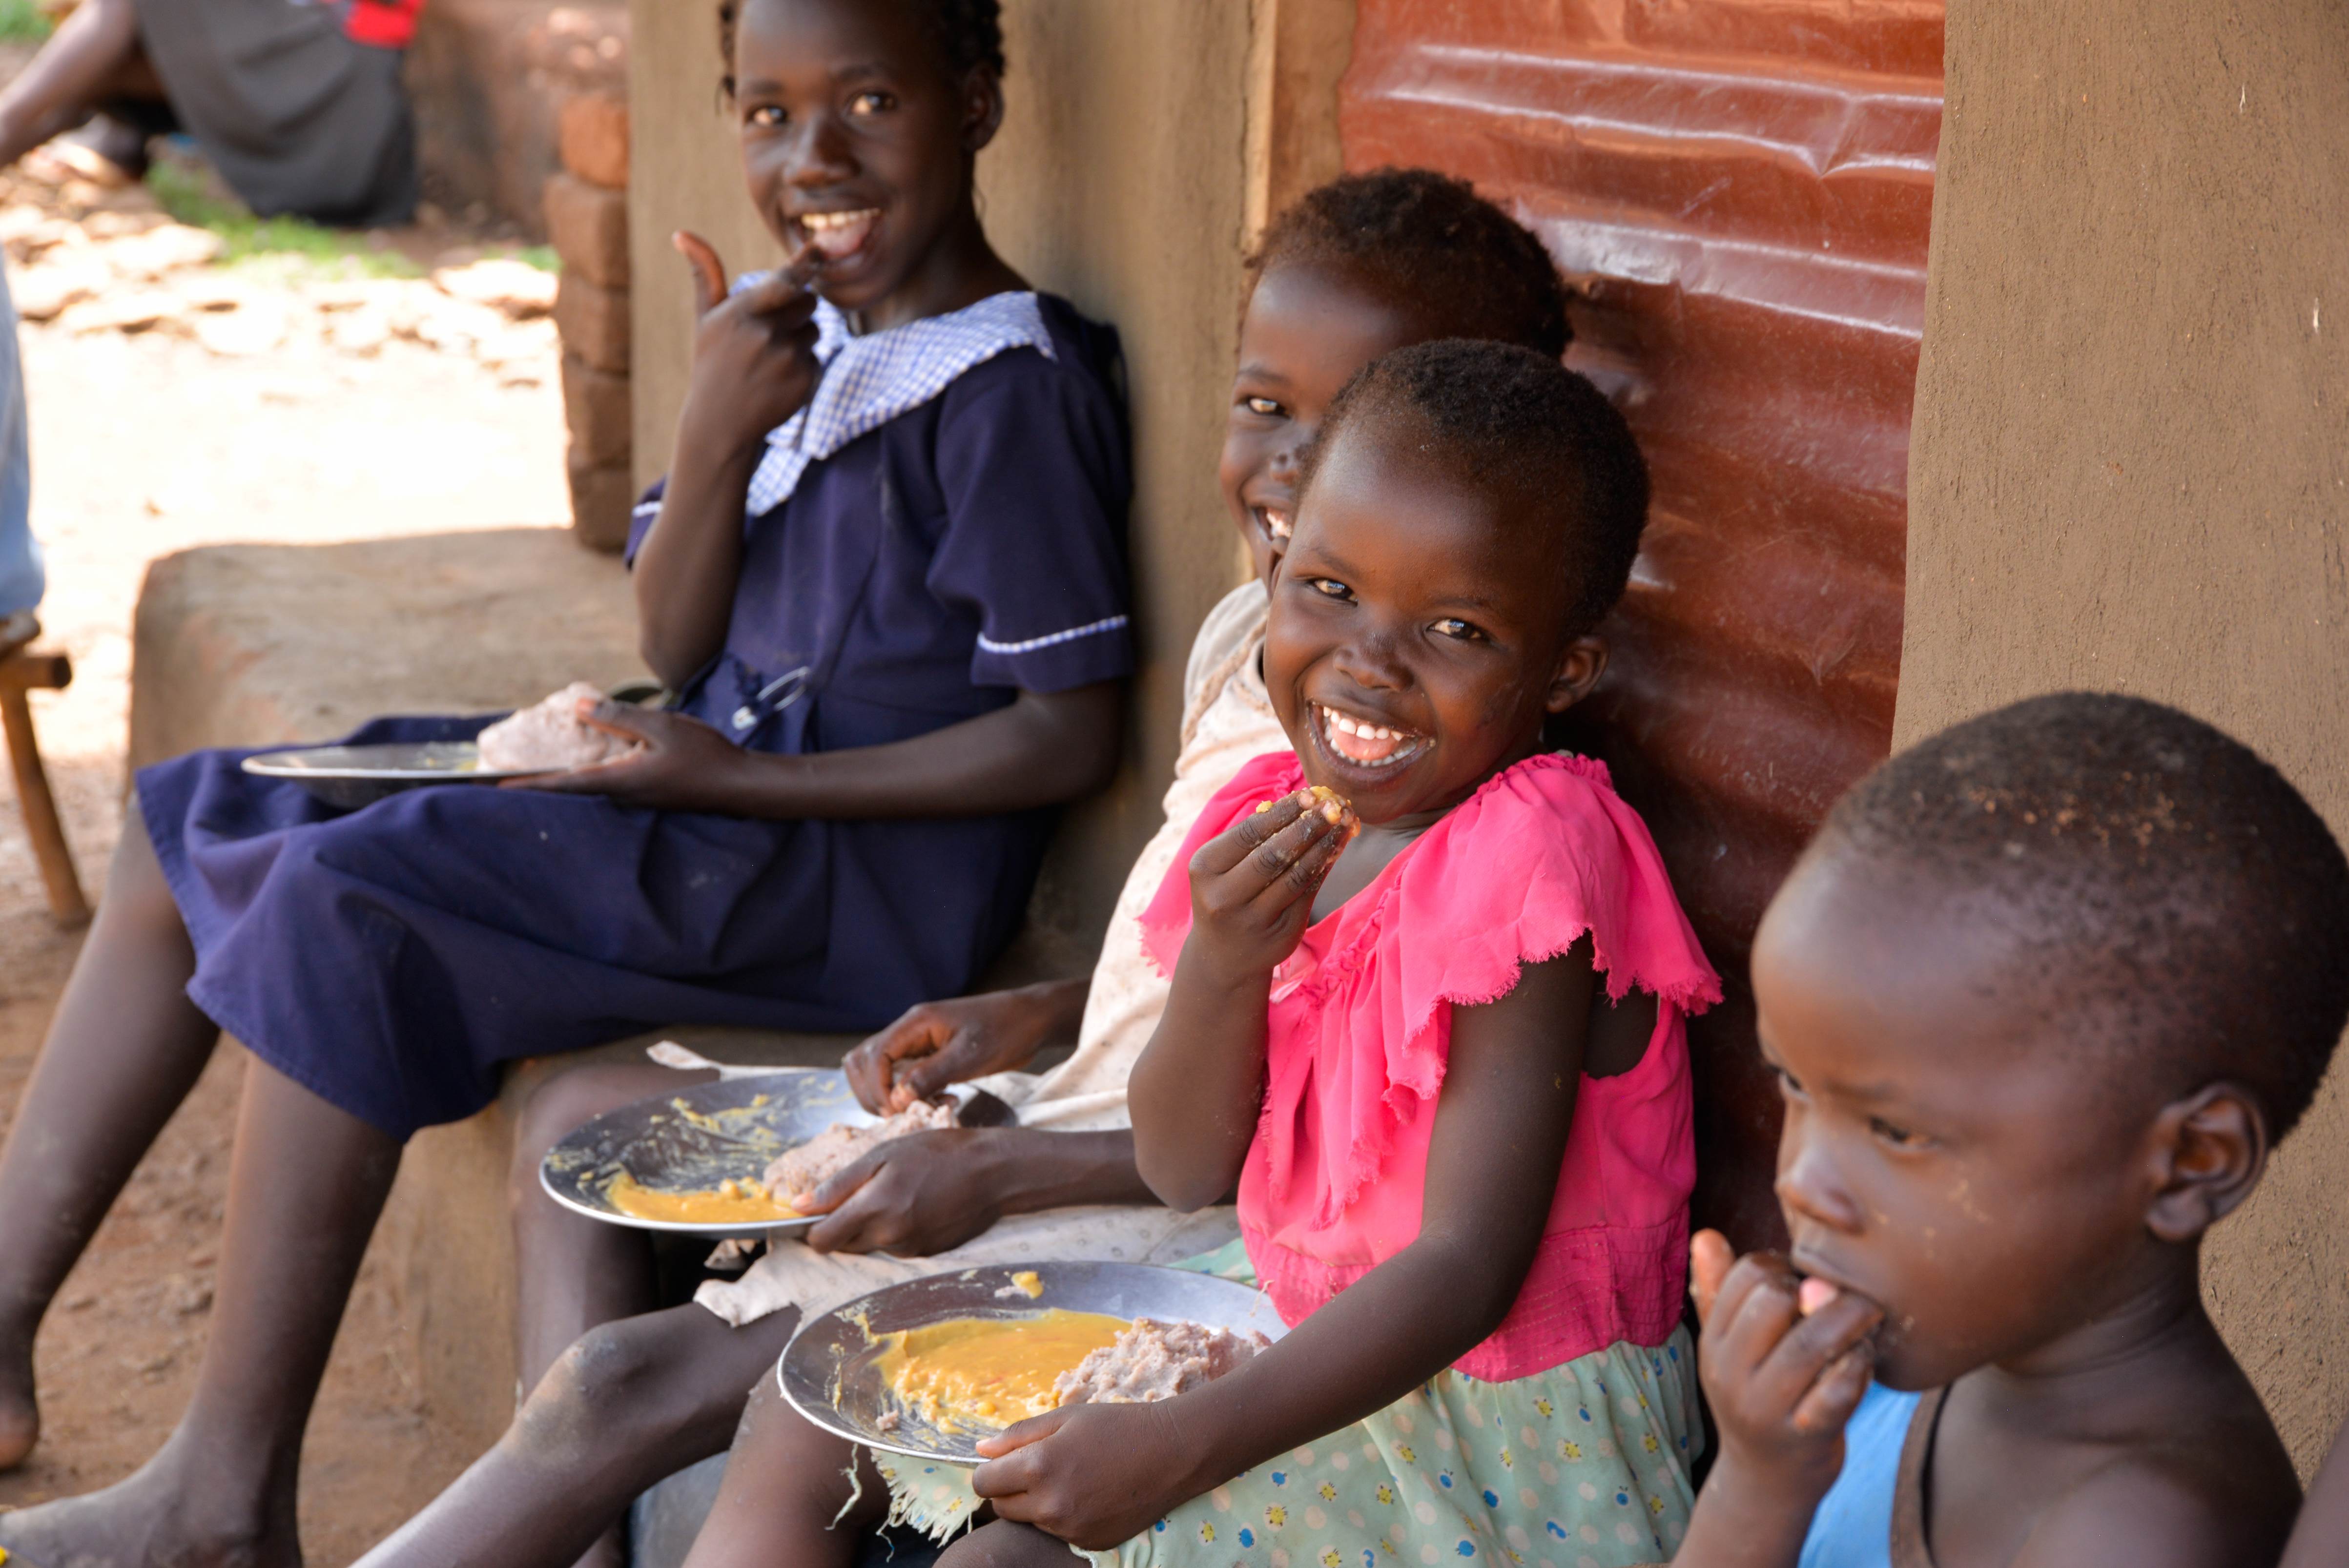 Children in Uganda, enjoy food in their own plates for lunch